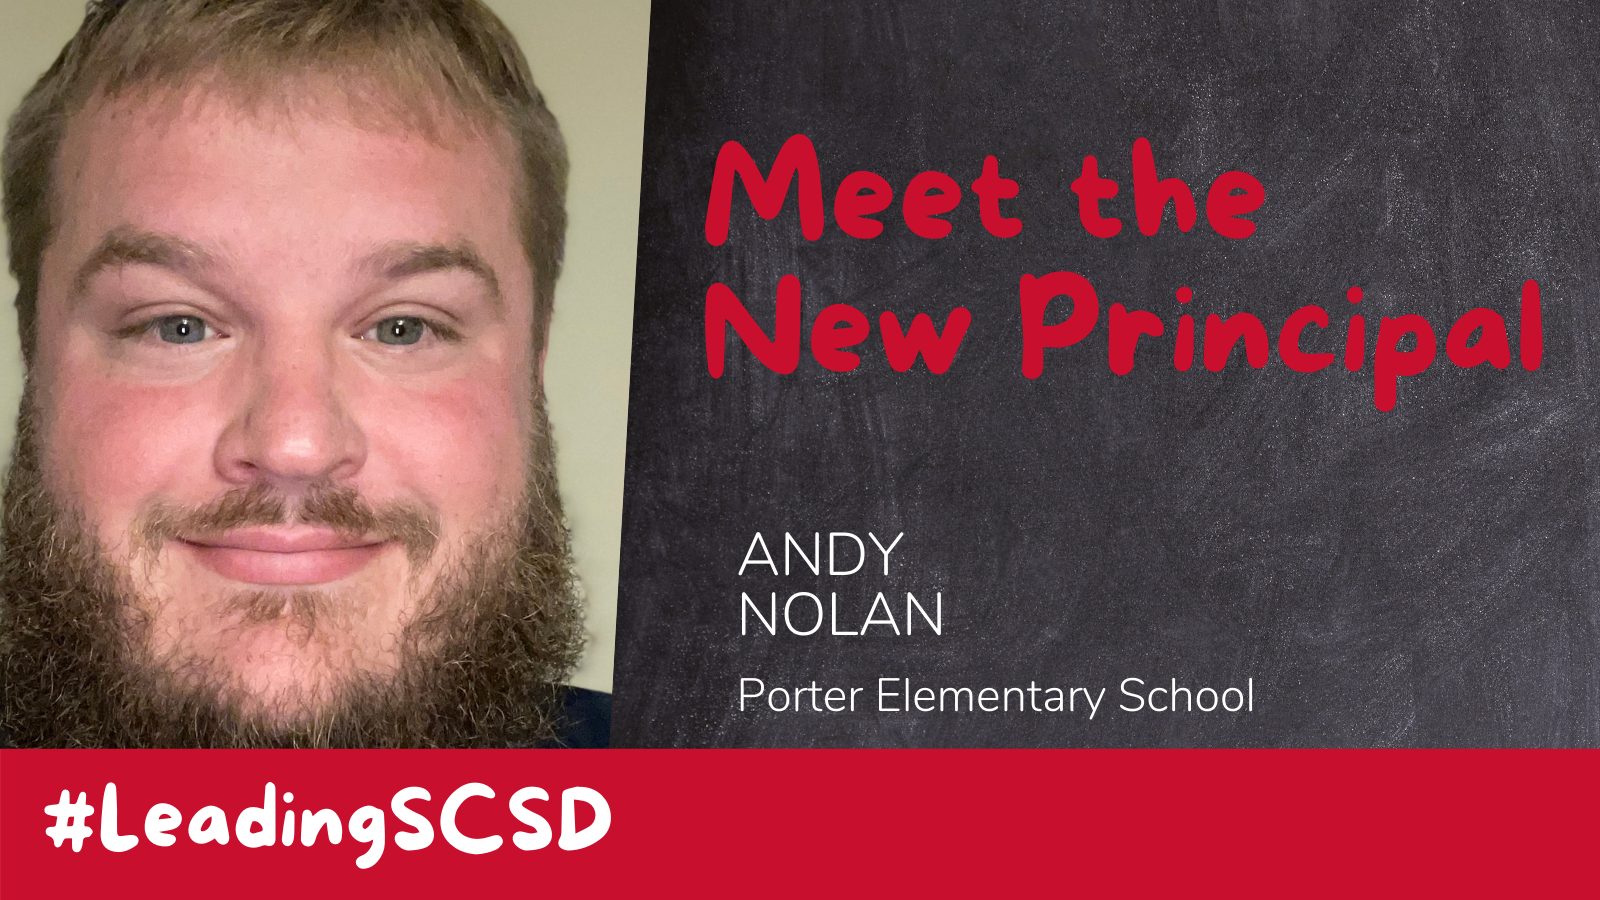 This is a graphic showing a picture of Porter Principal Andy Nolan with text that reads 'Meet the New Principal: Andy Nolan, Porter Elementary School.'